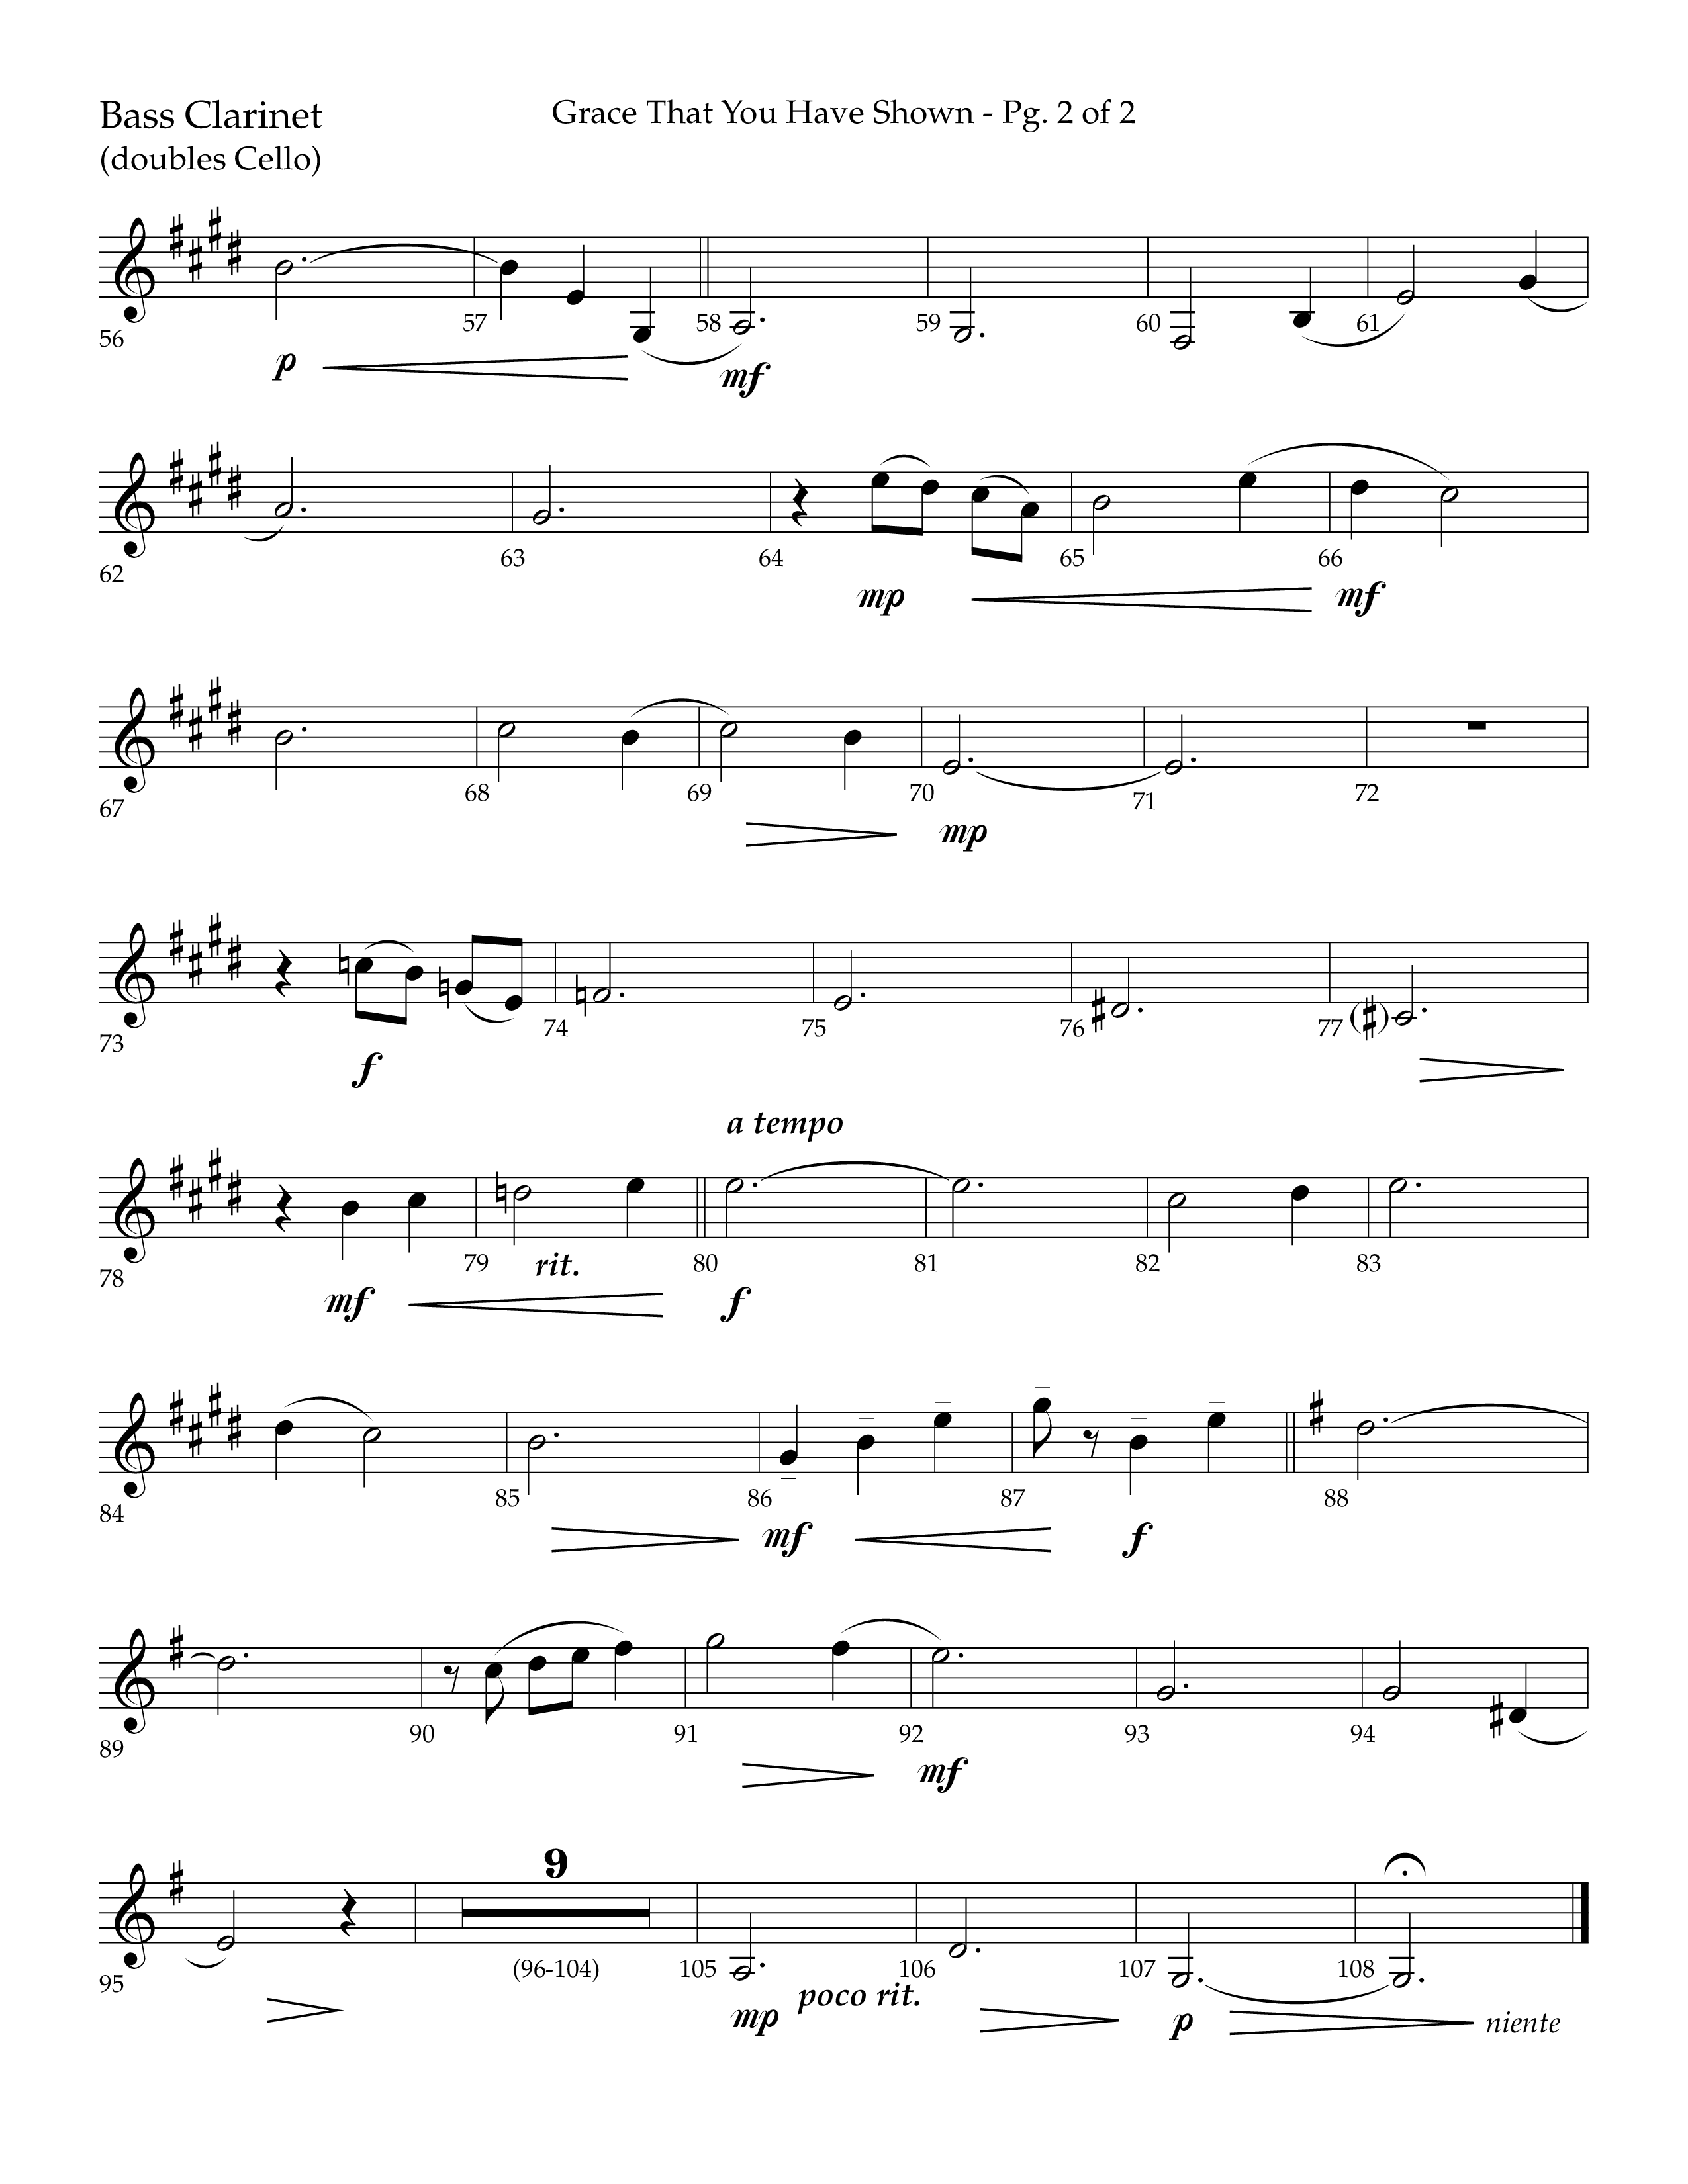 Grace That You Have Shown (Choral Anthem SATB) Bass Clarinet (Lifeway Choral / Arr. Phillip Keveren / Orch. Danny Mitchell)